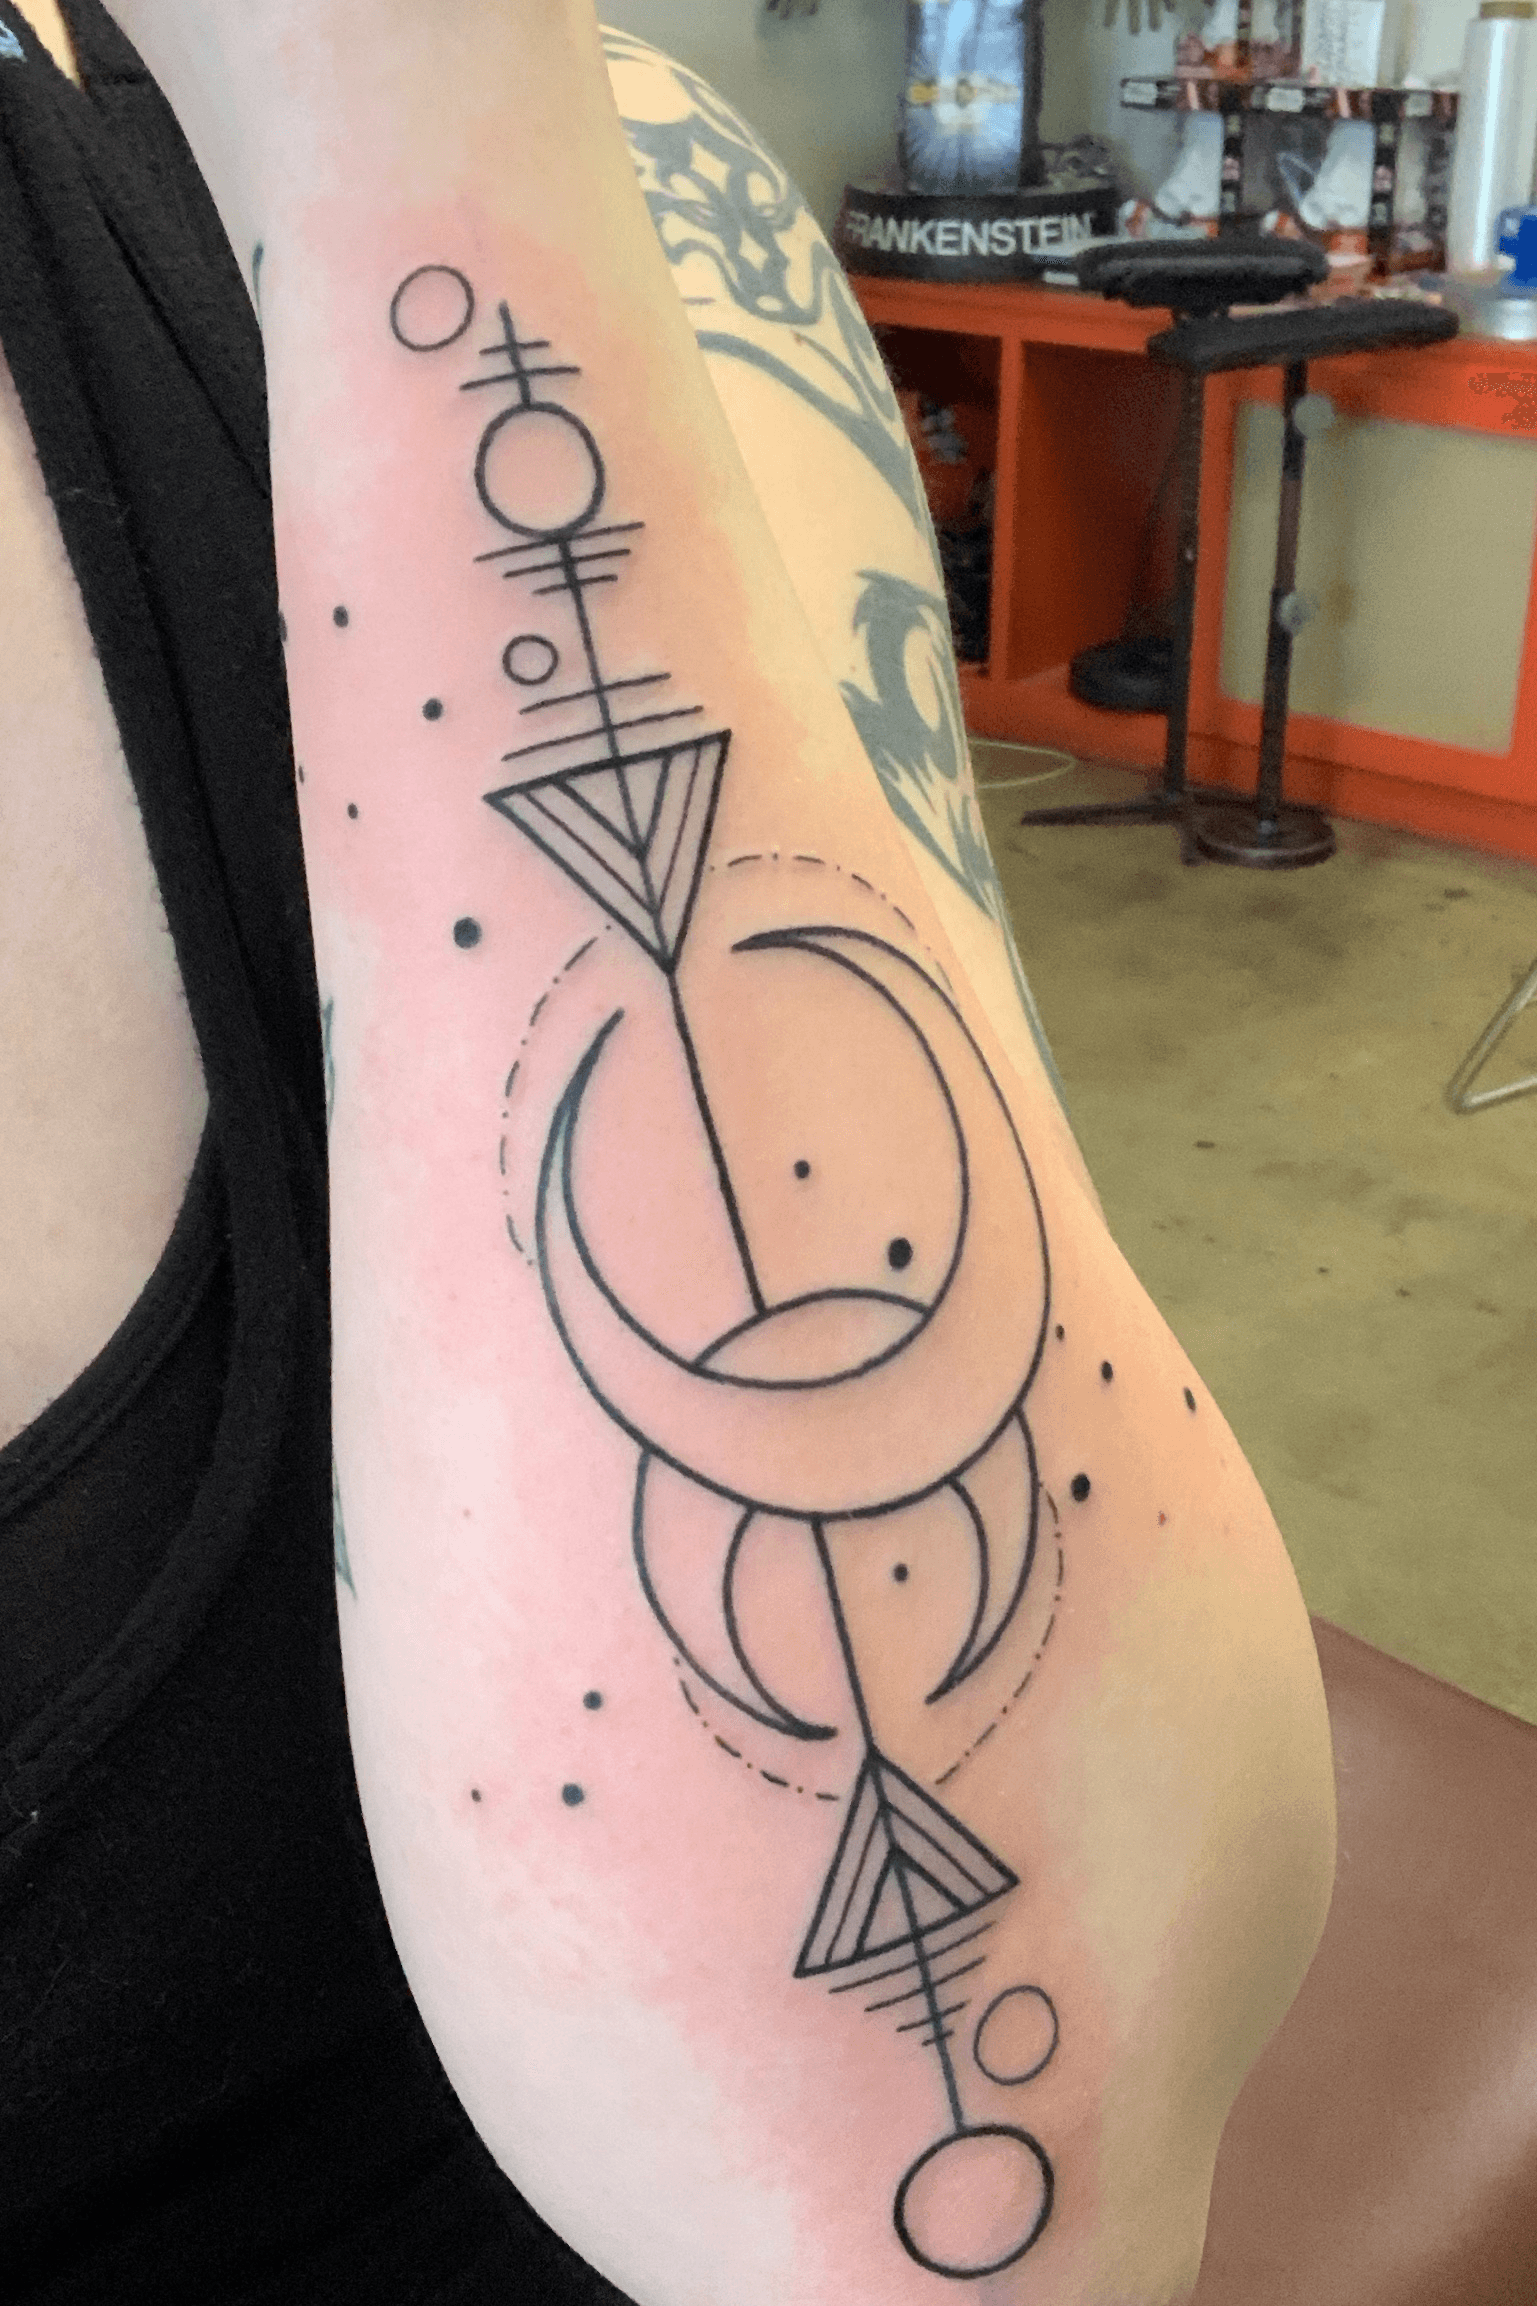 Samsara Studio  Love this geometric Pisces constellation design tattooed  by Caz for her lovely customer Clare  samsarastudio constellationtattoo  starsigntattoo piscesconstellation geometricstyletattoo thightattoo  tattoo blackinktattoo 